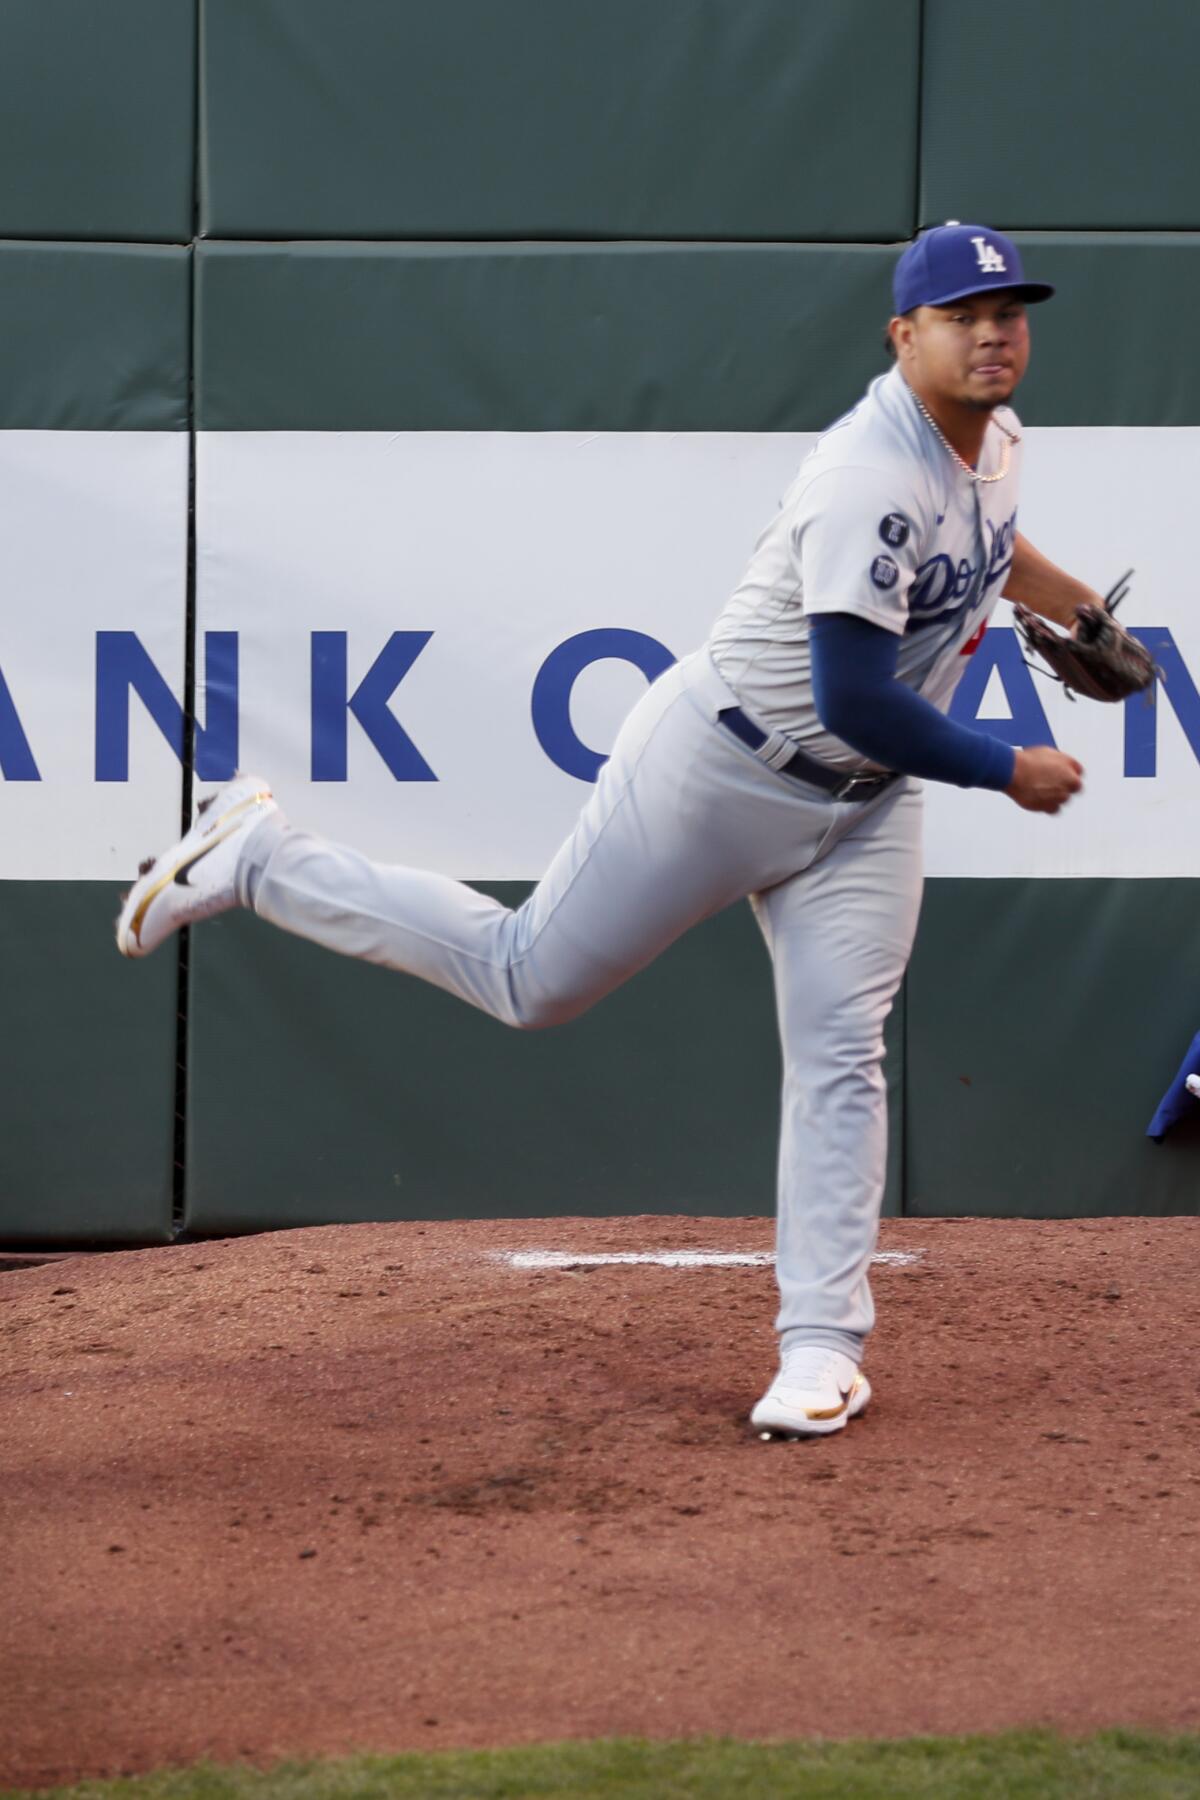 Dodgers relief pitcher Brusdar Graterol warms up in the bullpen during the first inning.